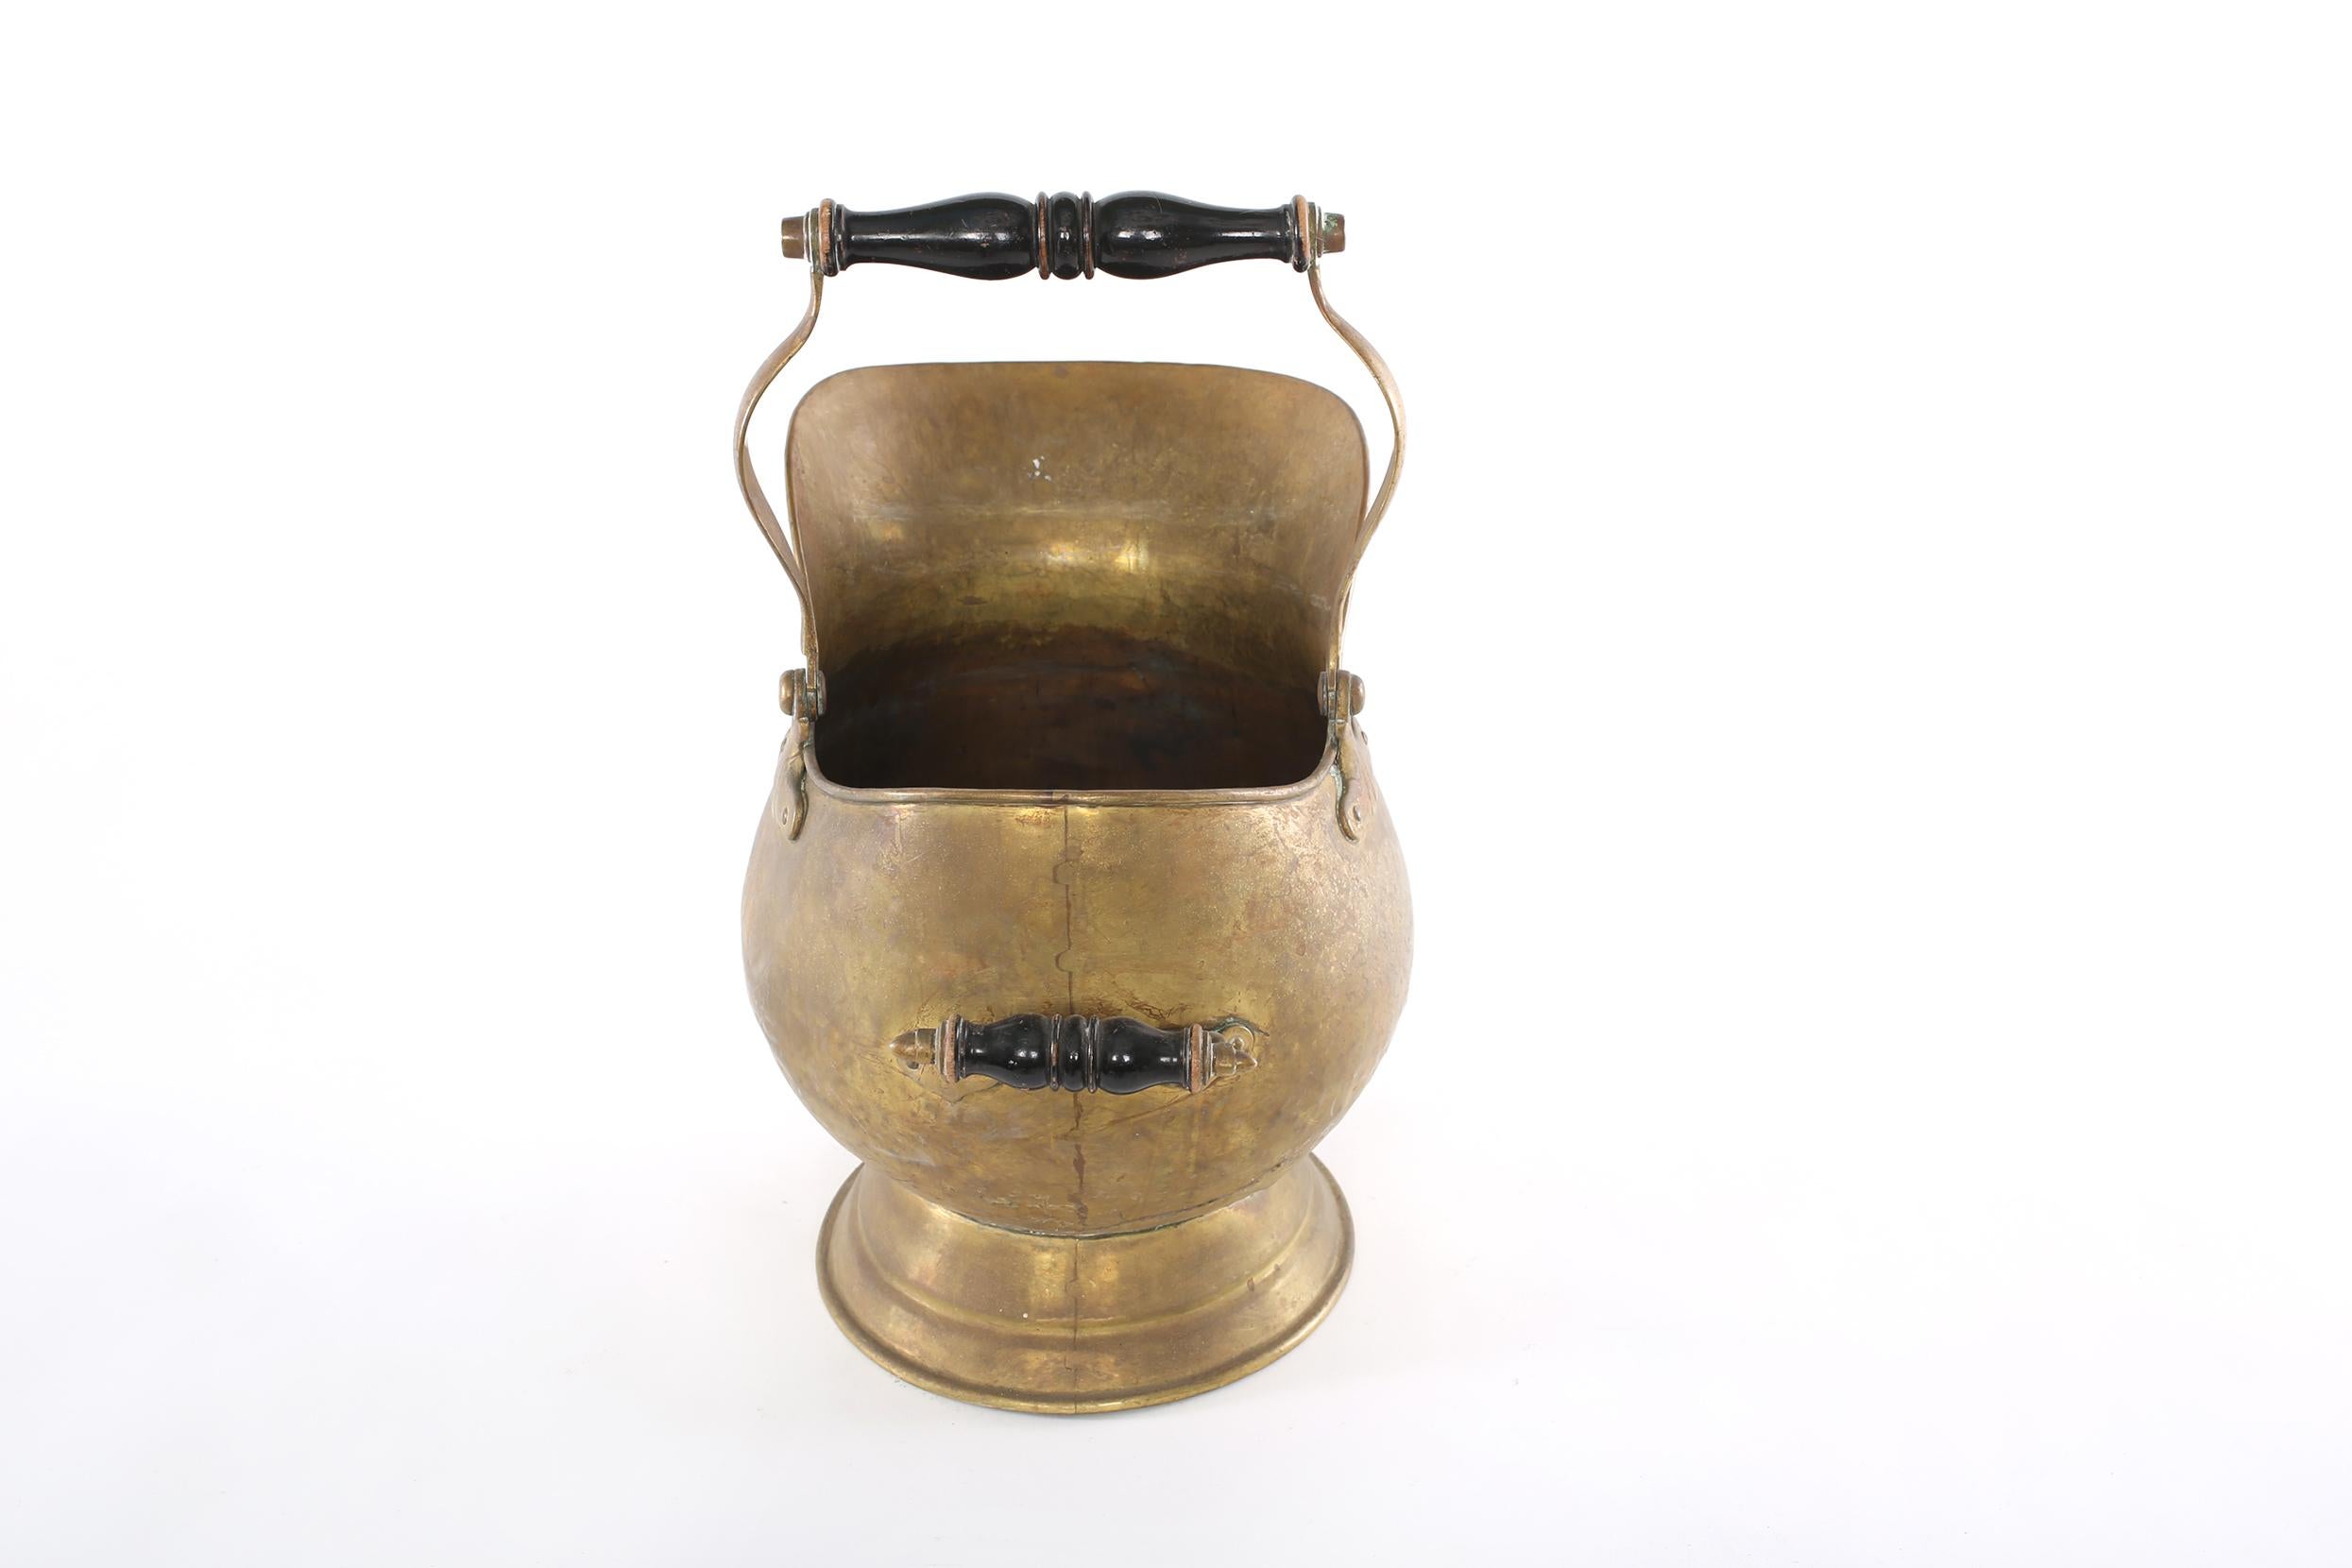 19th century Eastern European solid brass ash bucket / fire log holder with wood handles. The fire log is in good condition with age appropriate wear. Maker's mark undersigned. The log bucket stand about 17 inches tall to the top of the handle x 15